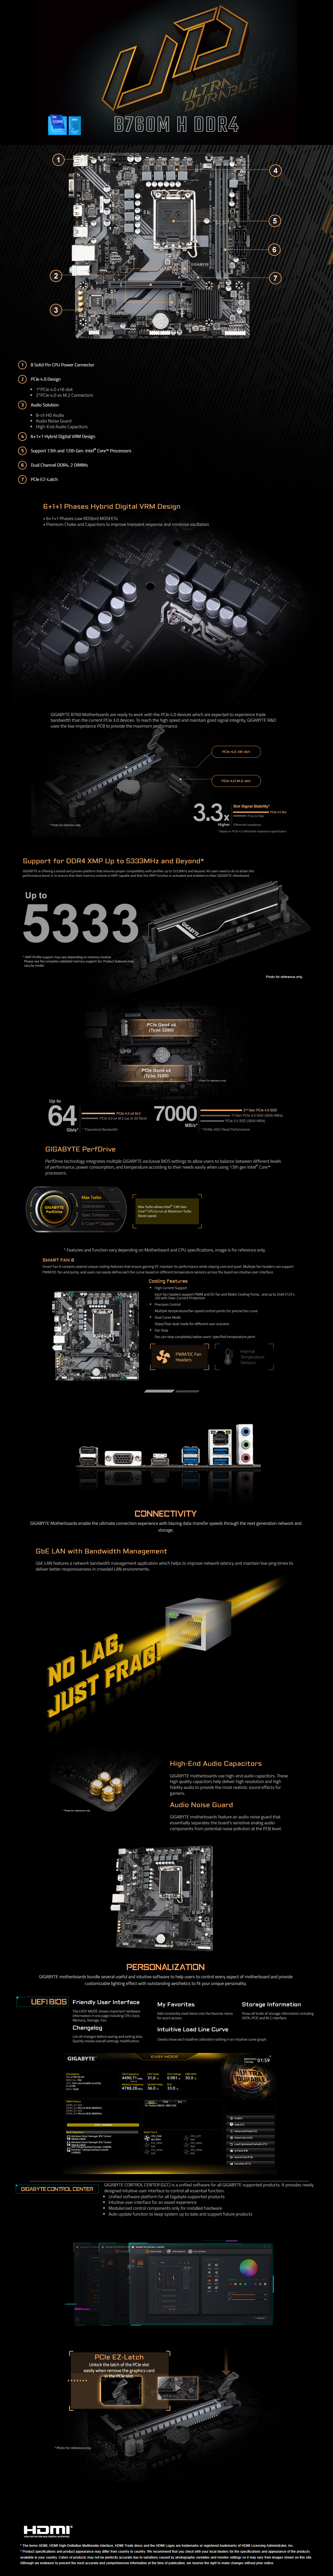 A large marketing image providing additional information about the product Gigabyte B760M H DDR4 LGA1700 mATX Desktop Motherboard - Additional alt info not provided